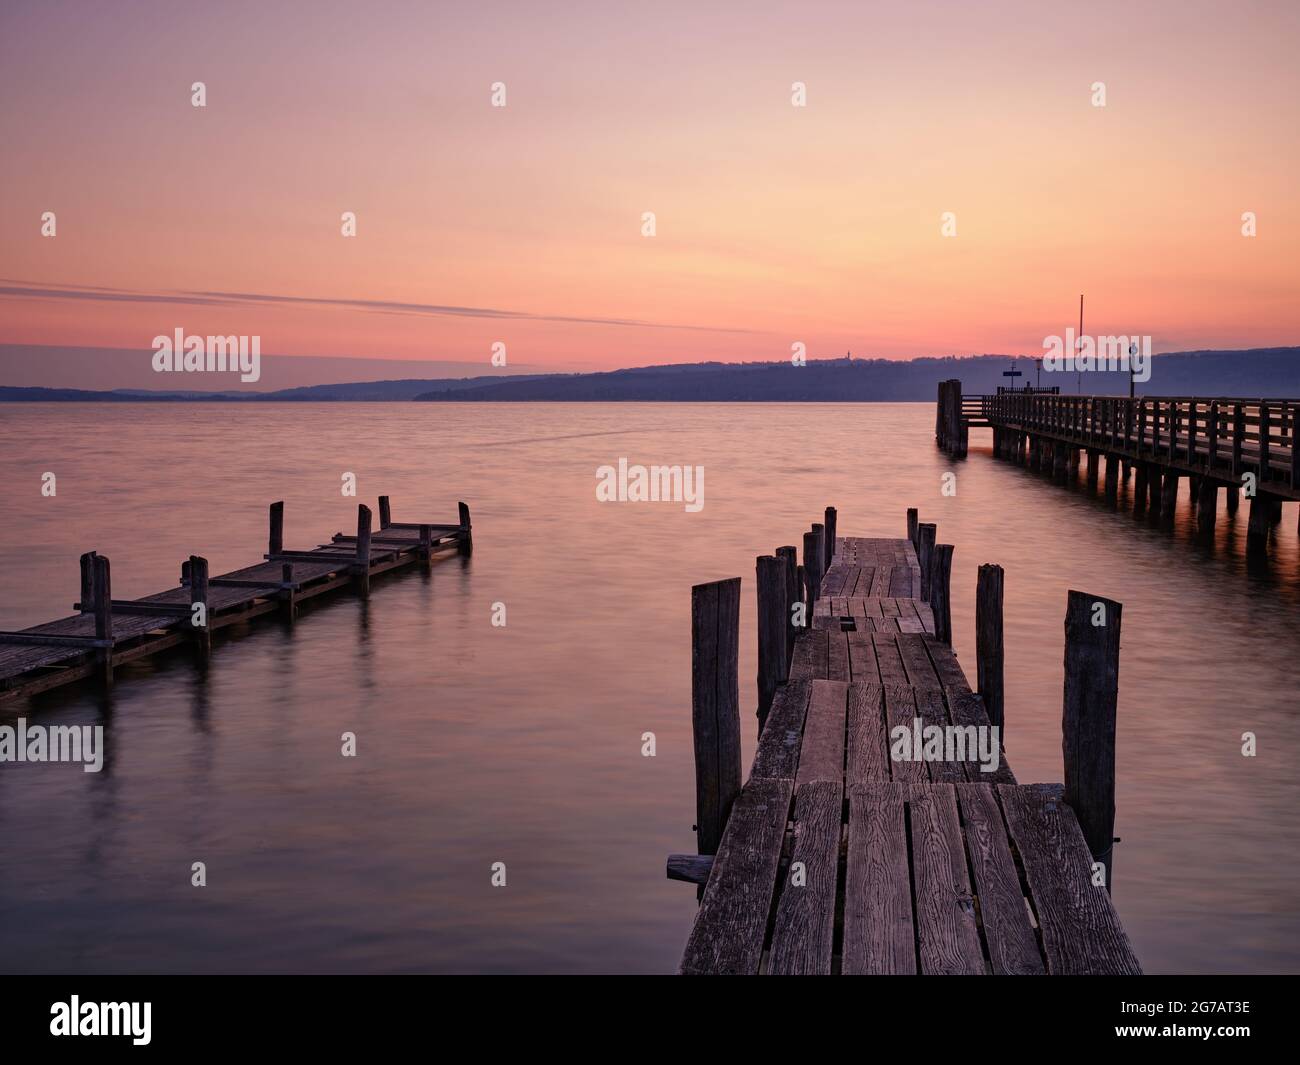 Lake, standing water, lakeshore, Steeg, jetty, Bayerdießen, Bavarian foothills of the Alps, sunrise, dawn, clouds, colored clouds, reflection, southern Ammersee, bank promenade, promenade, Alpine foothills Stock Photo